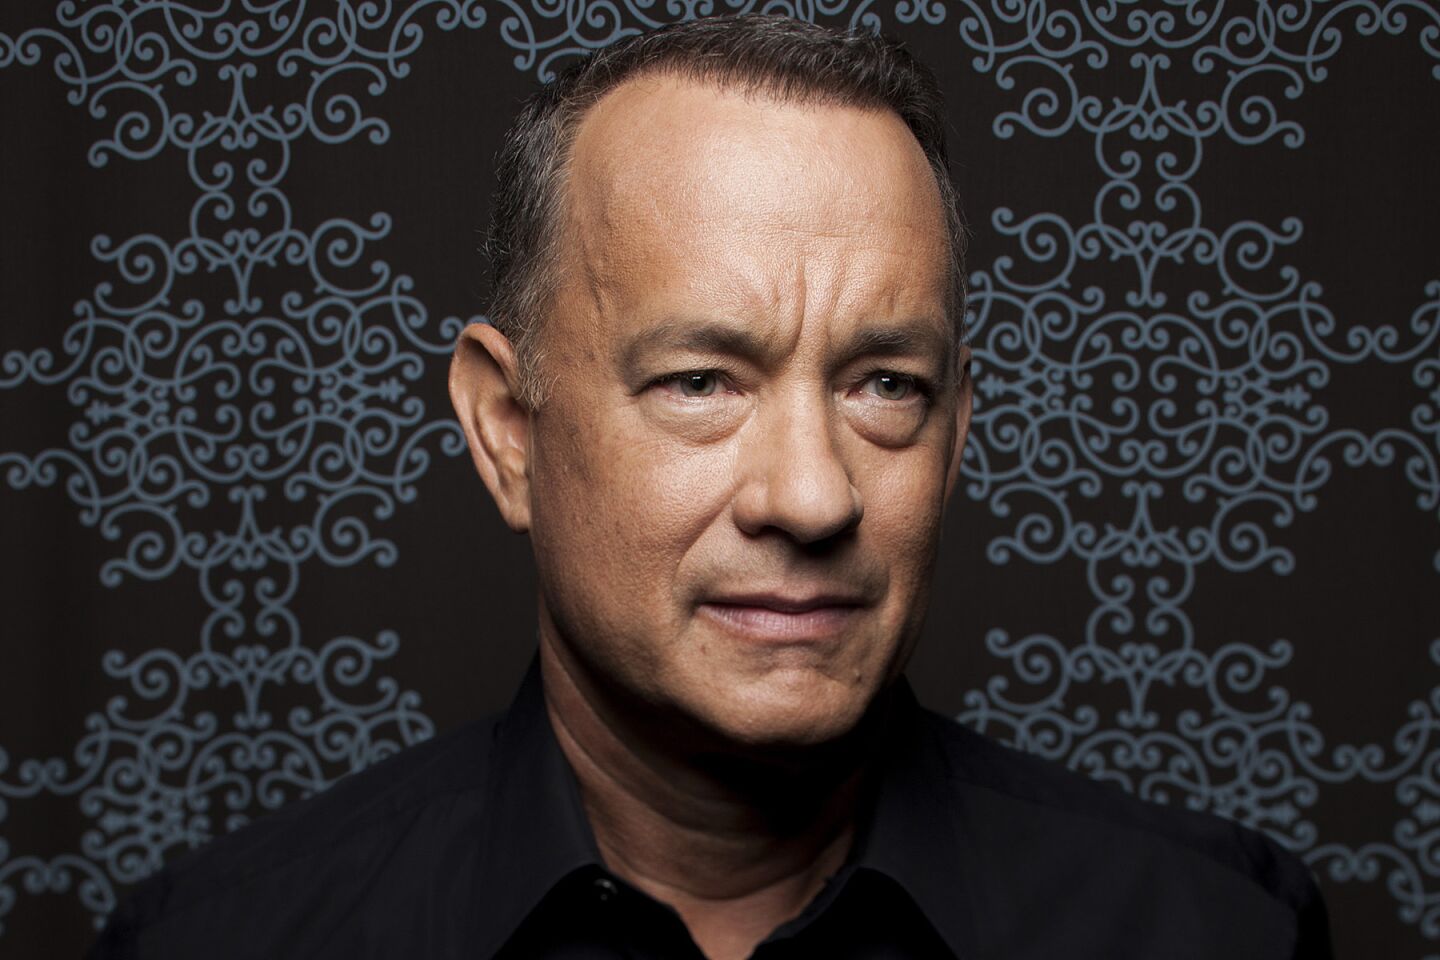 The actor wasn't even in New Zealand when reports surfaced in November 2006 that claimed he fell to his death there. A fake news site said Hanks died after falling 60 feet from the Kauri Cliffs, but the actor was actually in California, filming "Charlie Wilson's War."